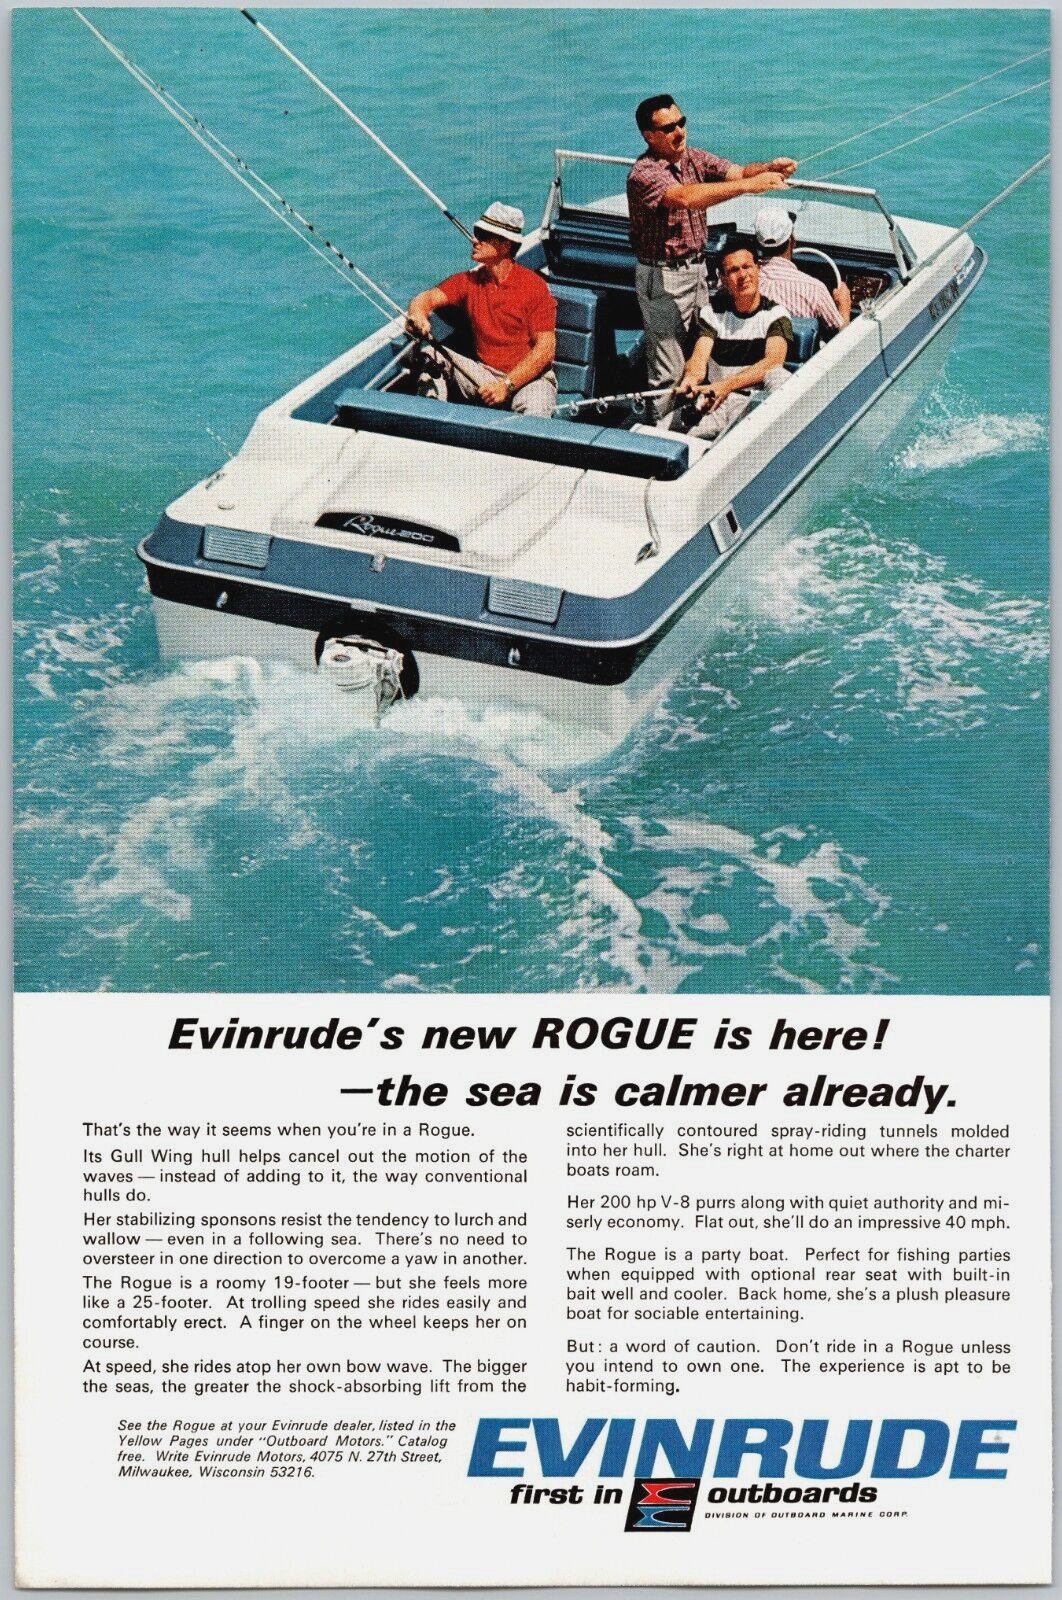 1967 Evinrude Rogue Motor Boat Gull Wing Hull Stabilizing Sponsons Print Ad